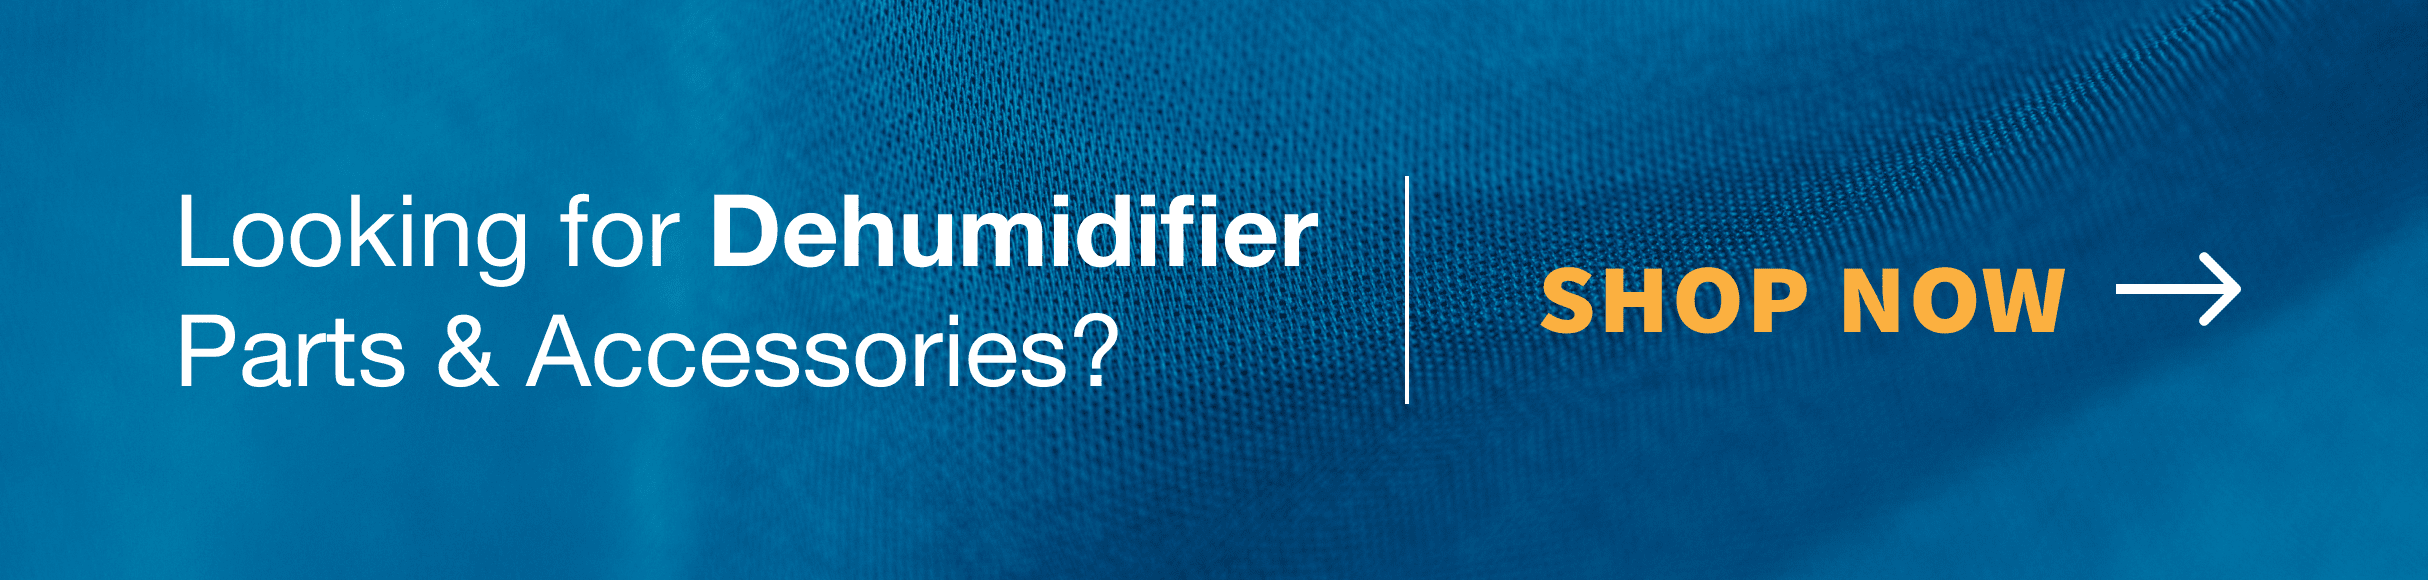 shop dehumidifier parts and accessories